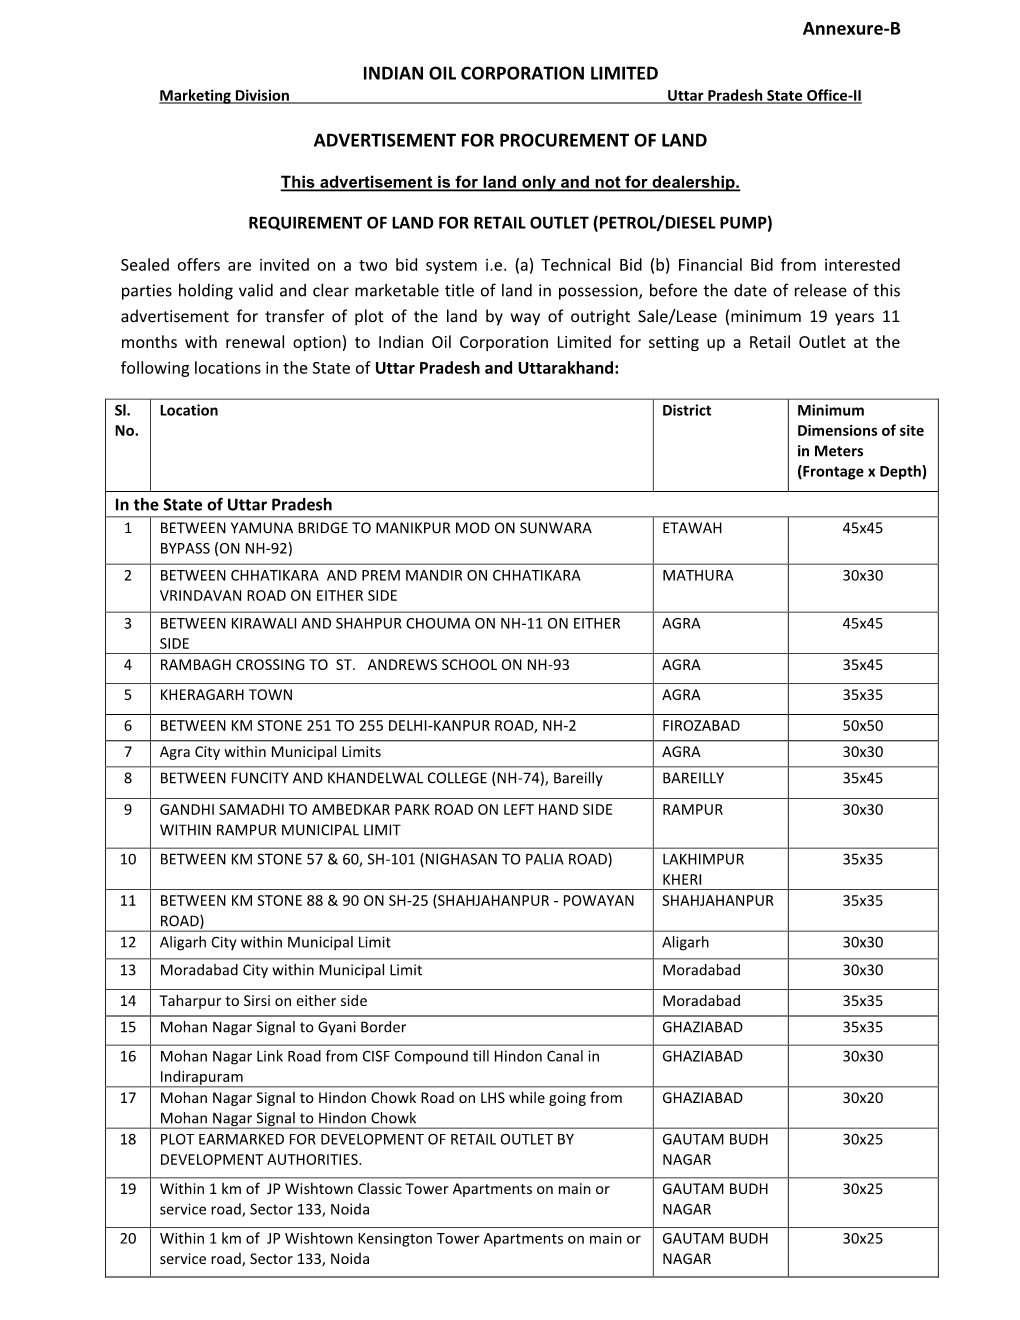 Annexure-B INDIAN OIL CORPORATION LIMITED ADVERTISEMENT for PROCUREMENT of LAND